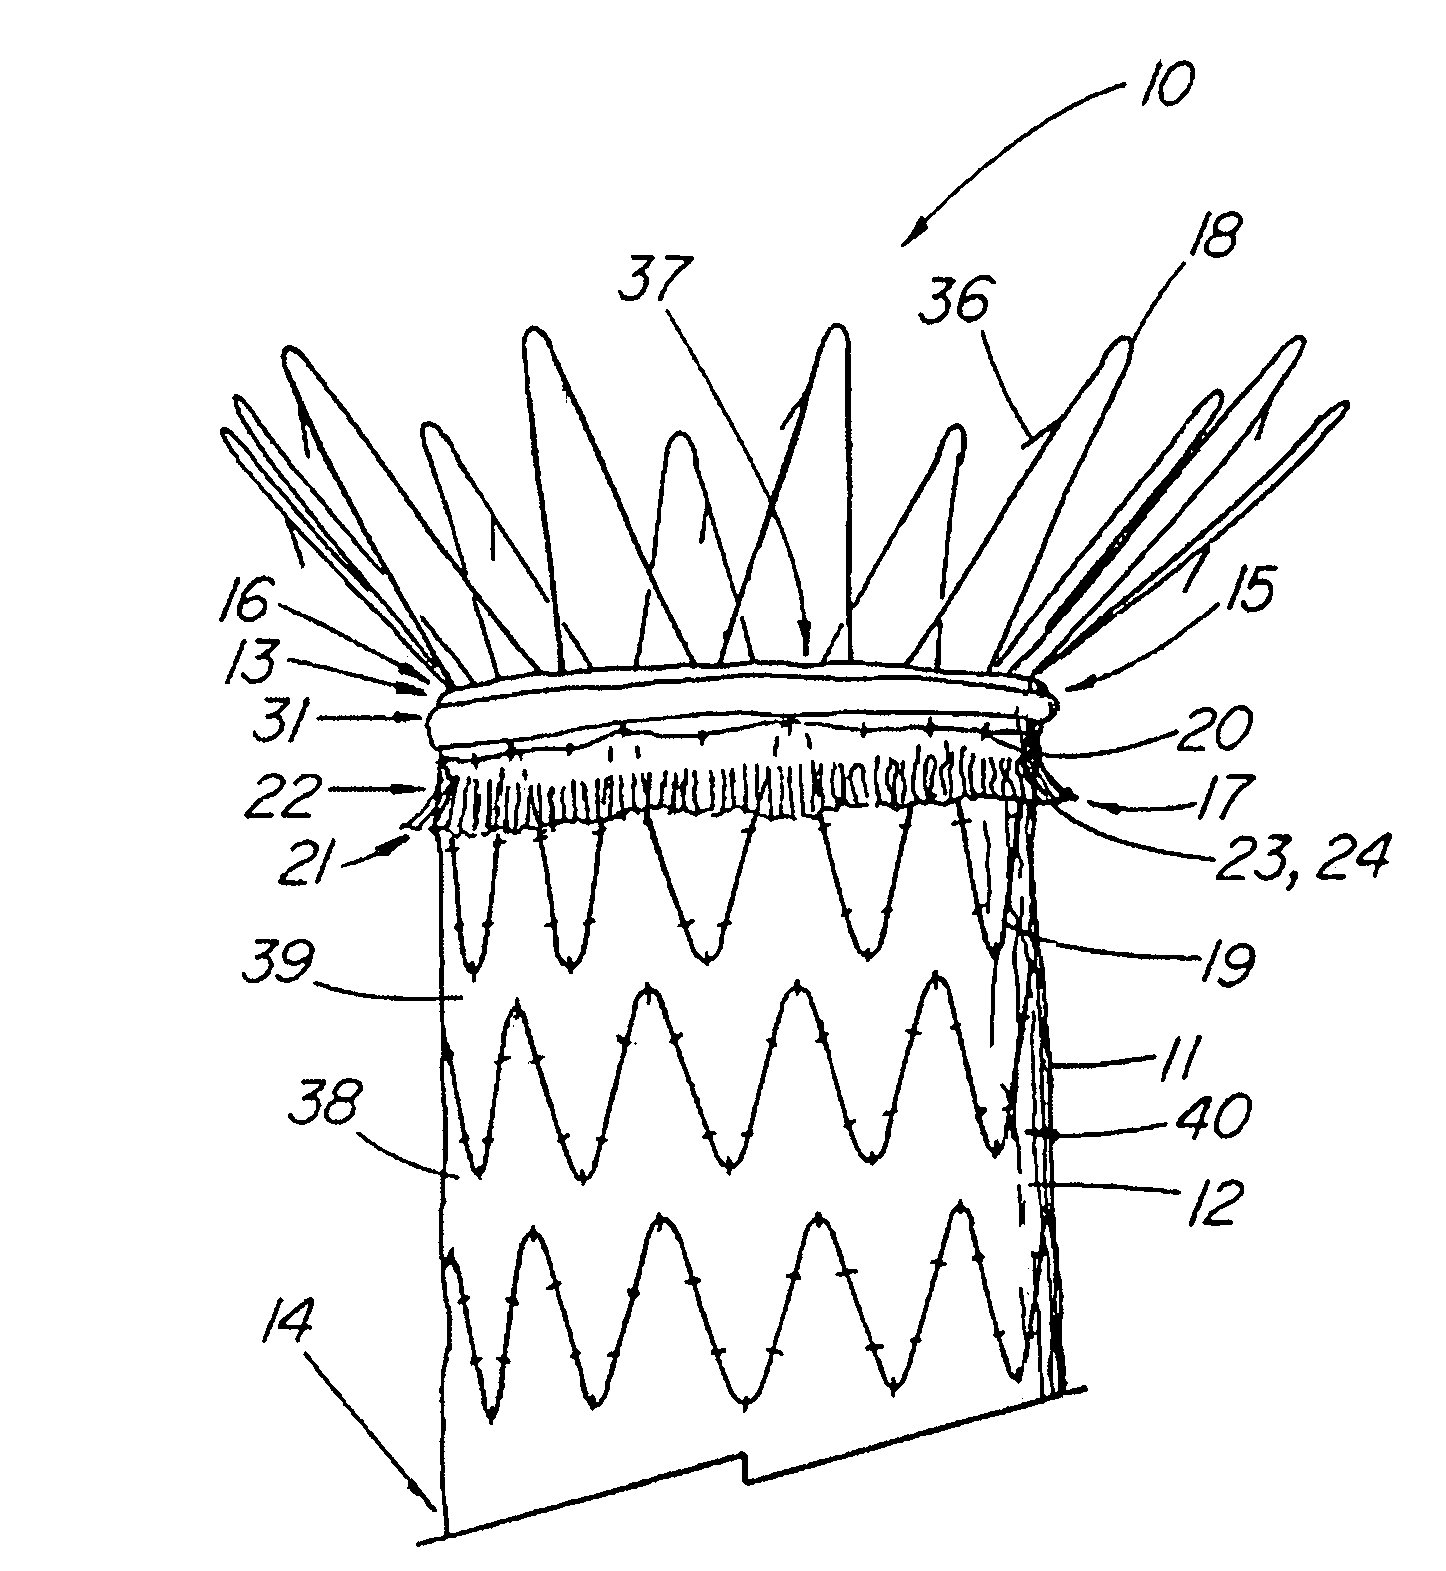 Endoluminal device with extracellular matrix material and methods